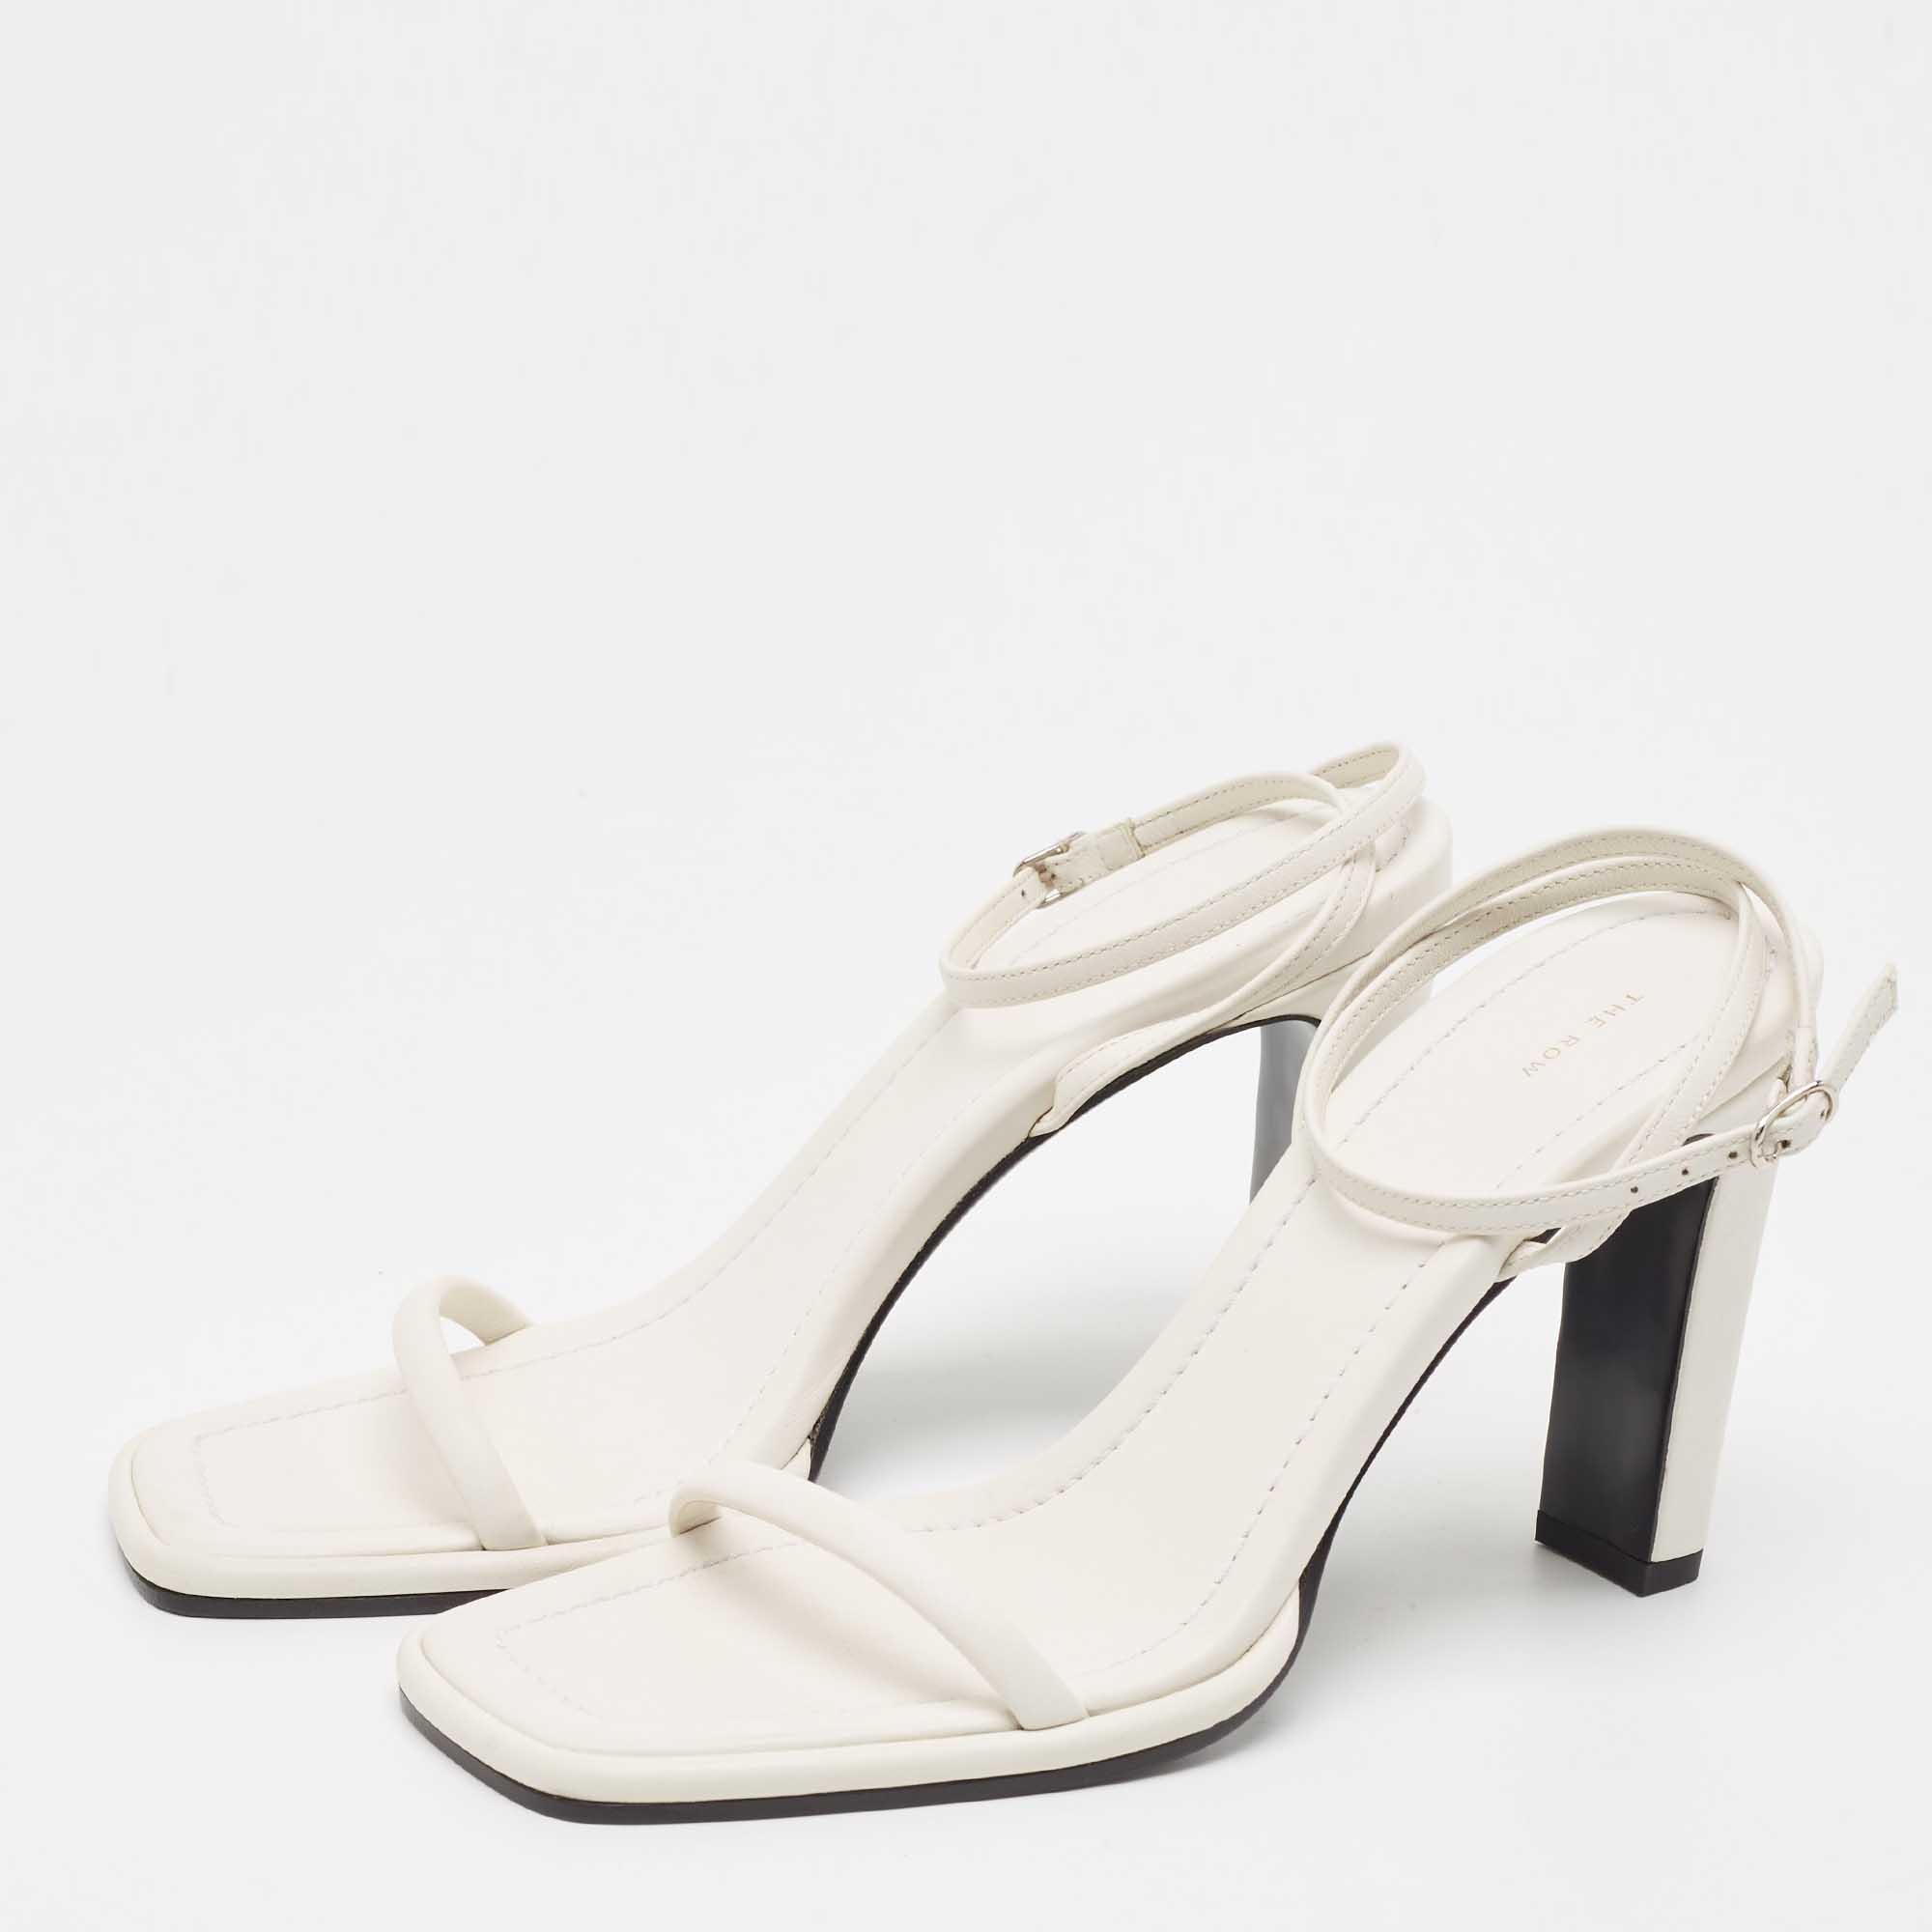 These sandals from The Row are meant to be a loved choice. Wonderfully crafted and balanced on 10 cm heels, the shoes will lift your feet in a stunning silhouette.

